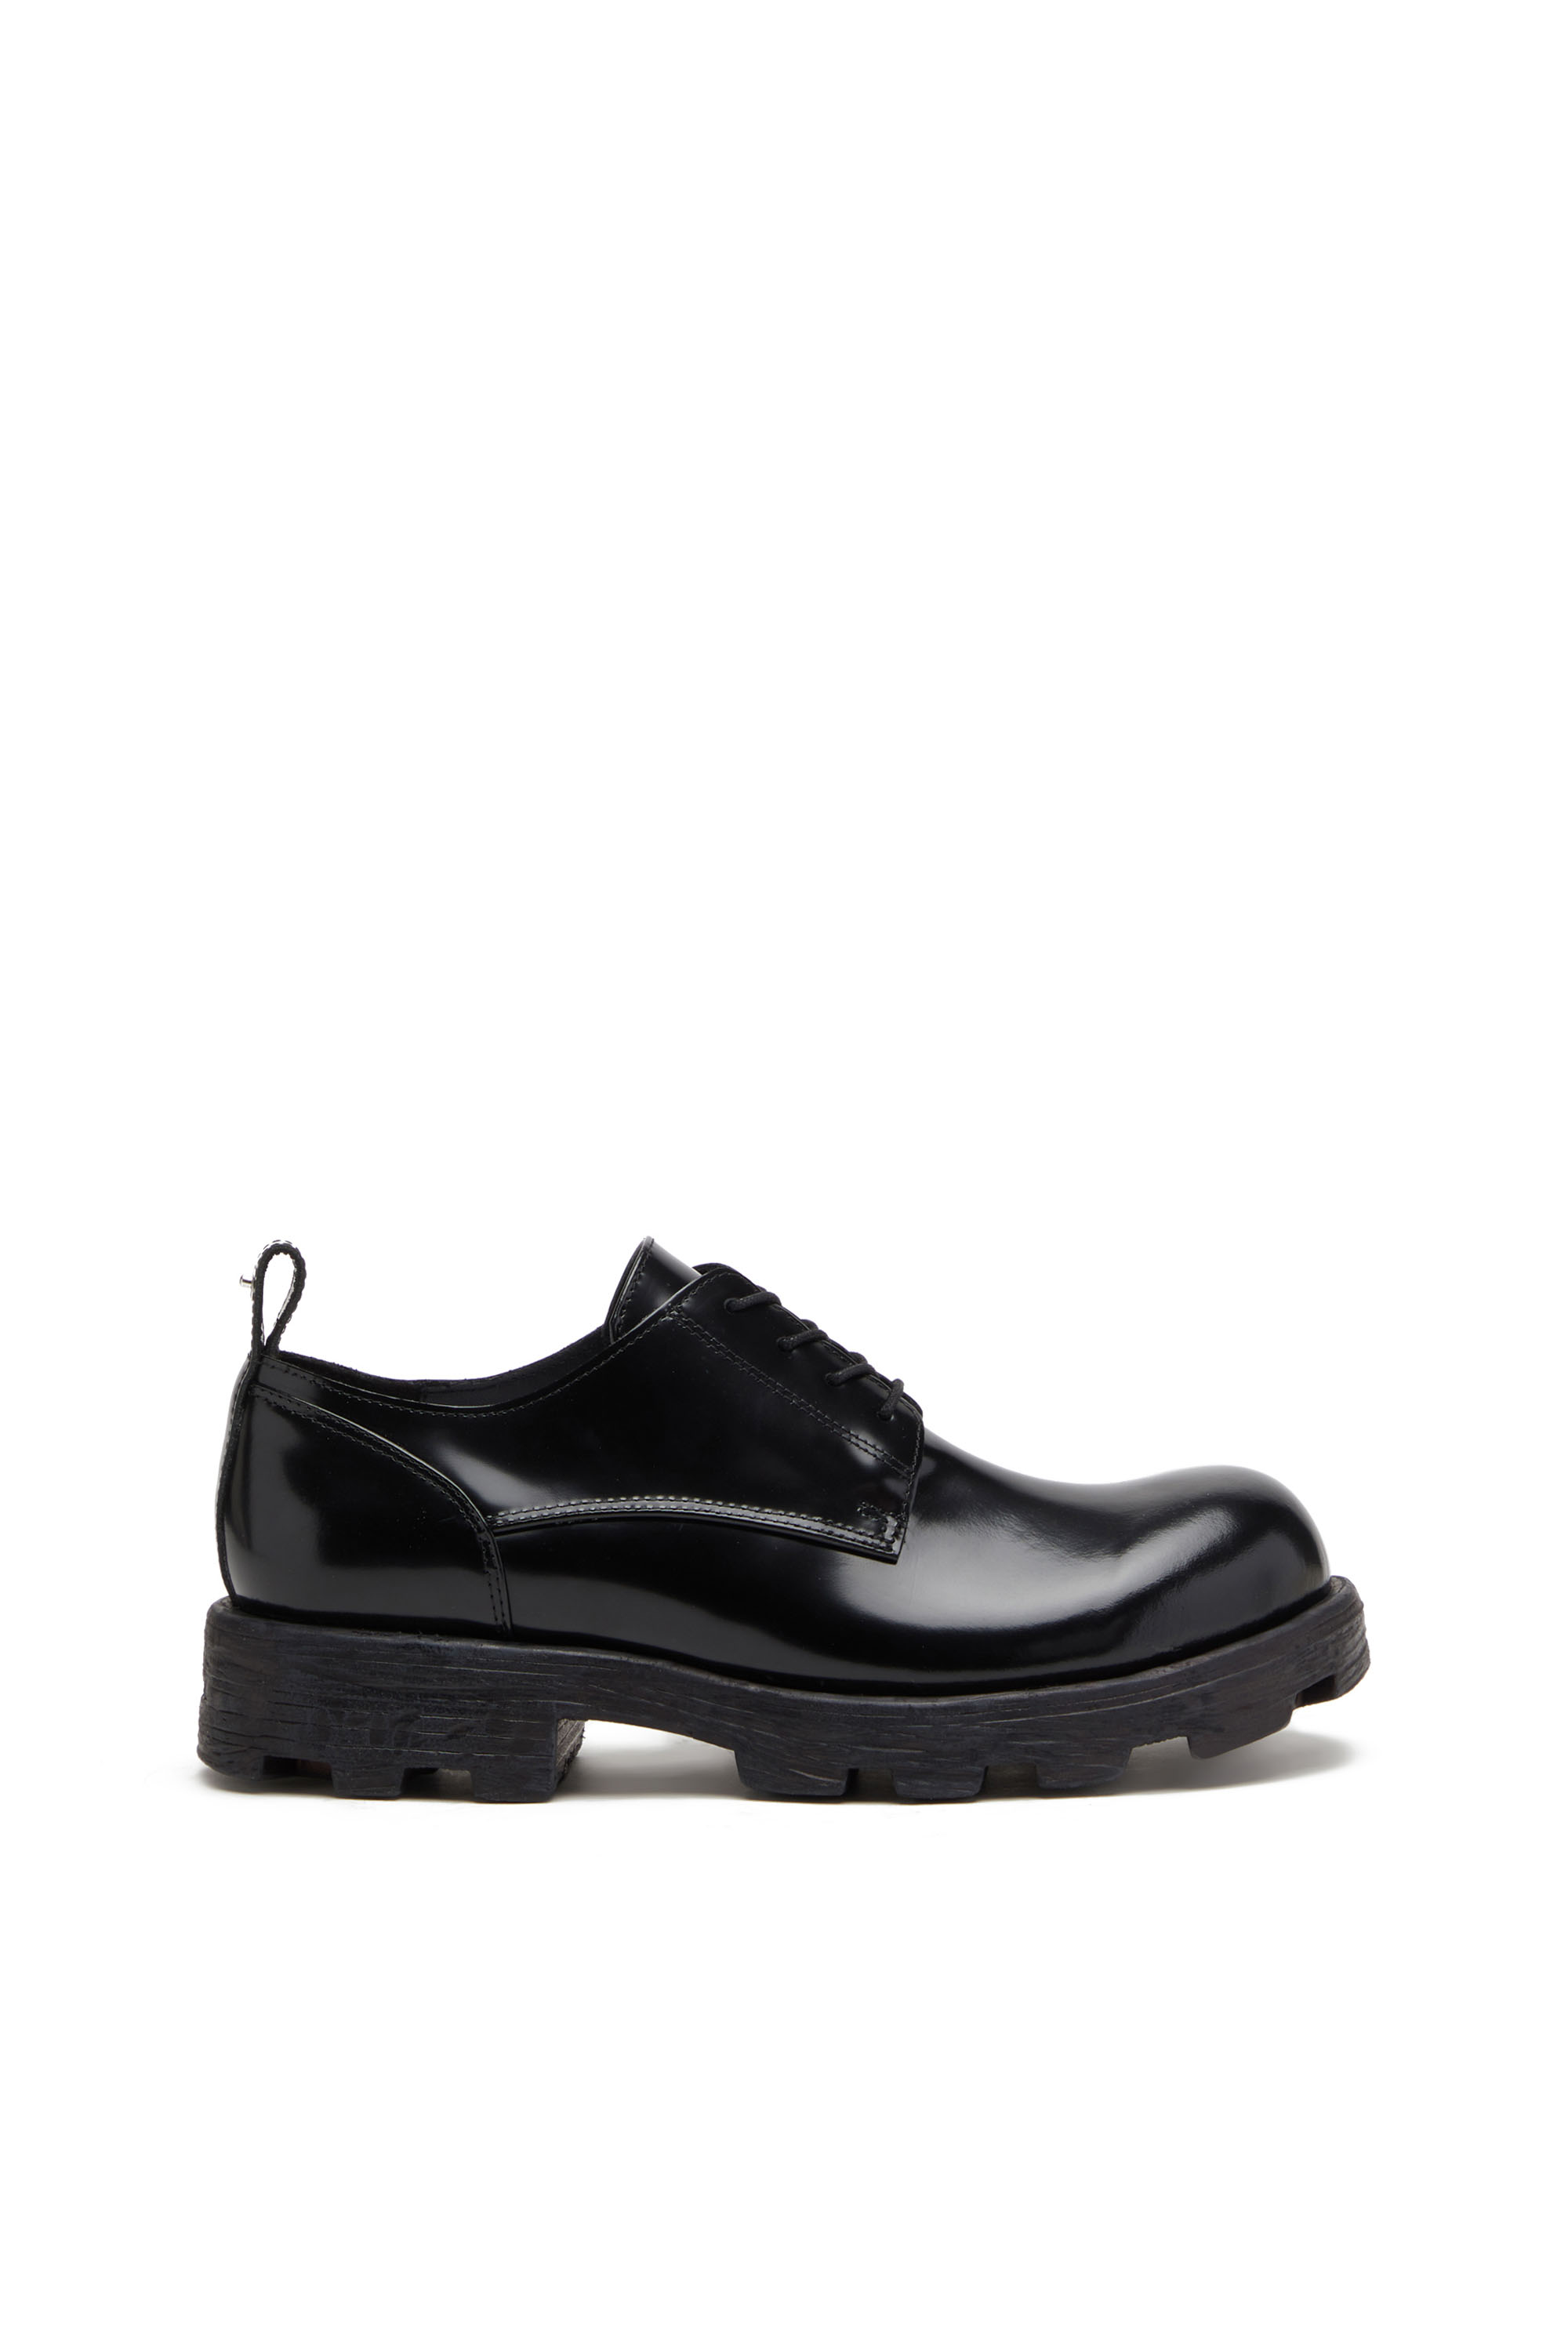 Diesel - D-Hammer SH - Lace-up shoes in shiny leather - Lace Ups and Mocassins - Man - Black